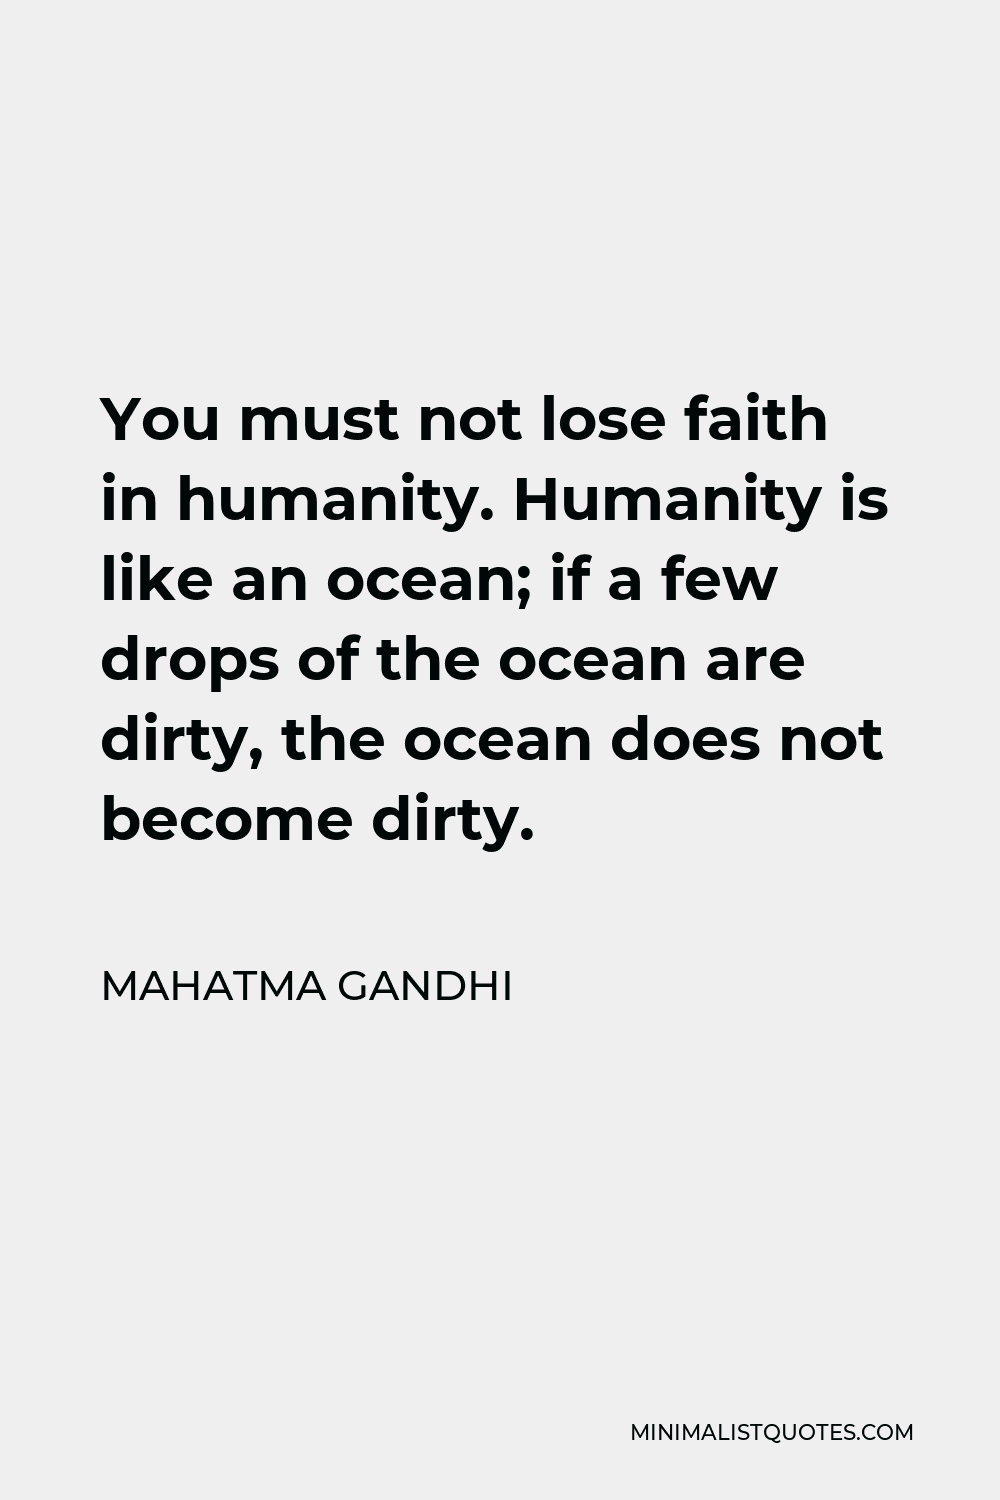 Mahatma Gandhi Quote - You must not lose faith in humanity. Humanity is like an ocean; if a few drops of the ocean are dirty, the ocean does not become dirty.